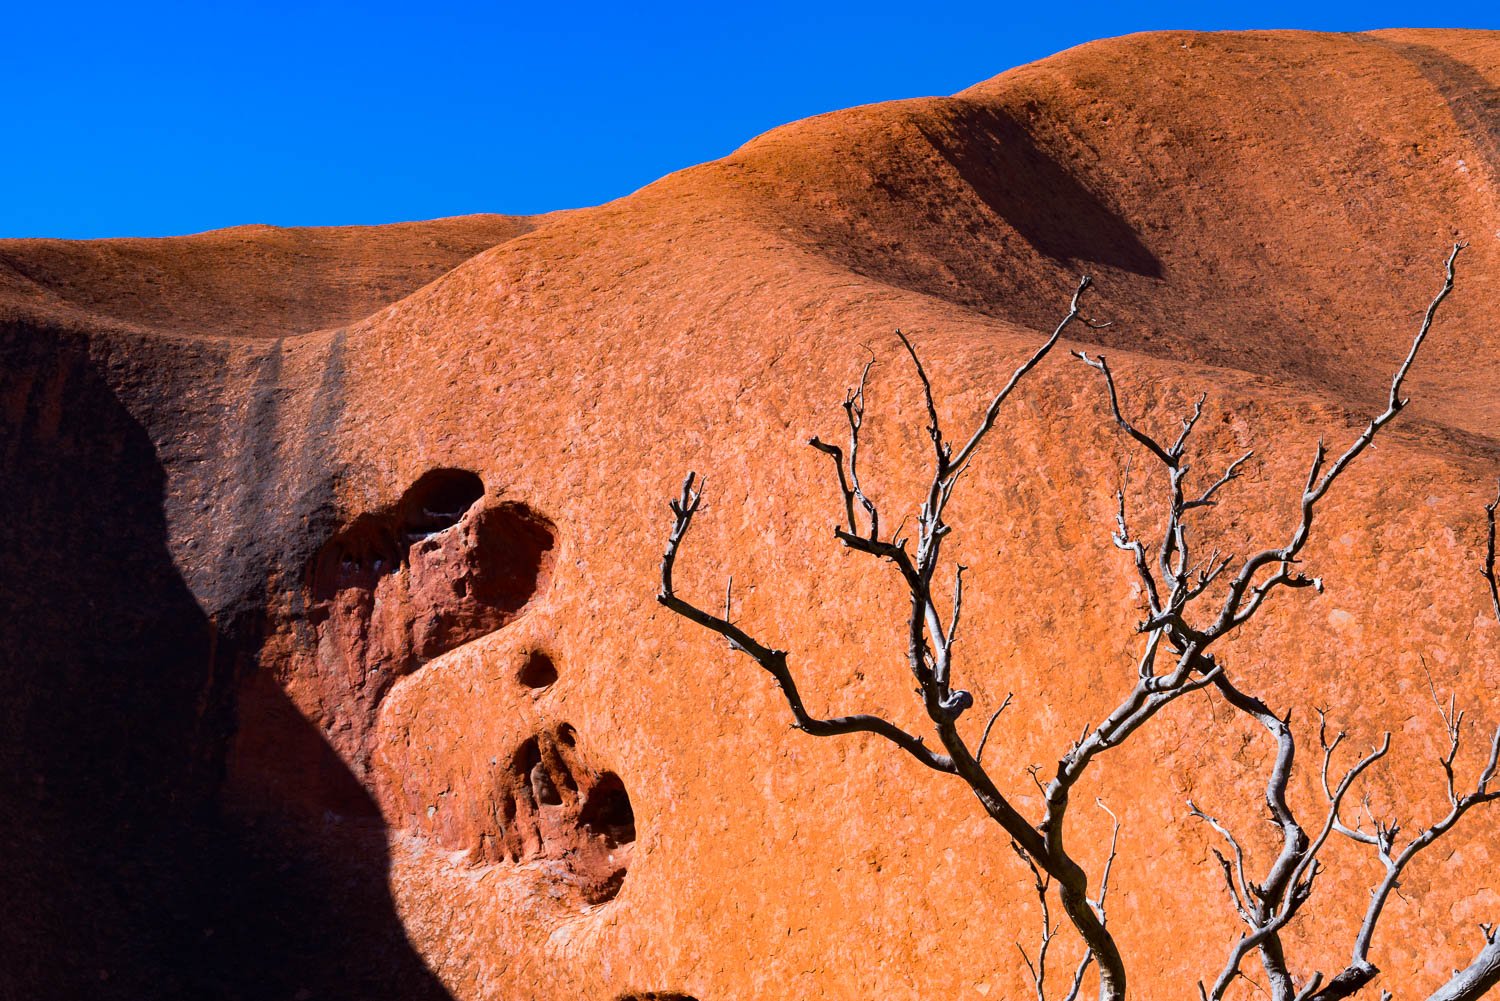 Giant rocky mountain wall with an empty multi-branches tree standing below, Uluru Abstract - Northern Territory